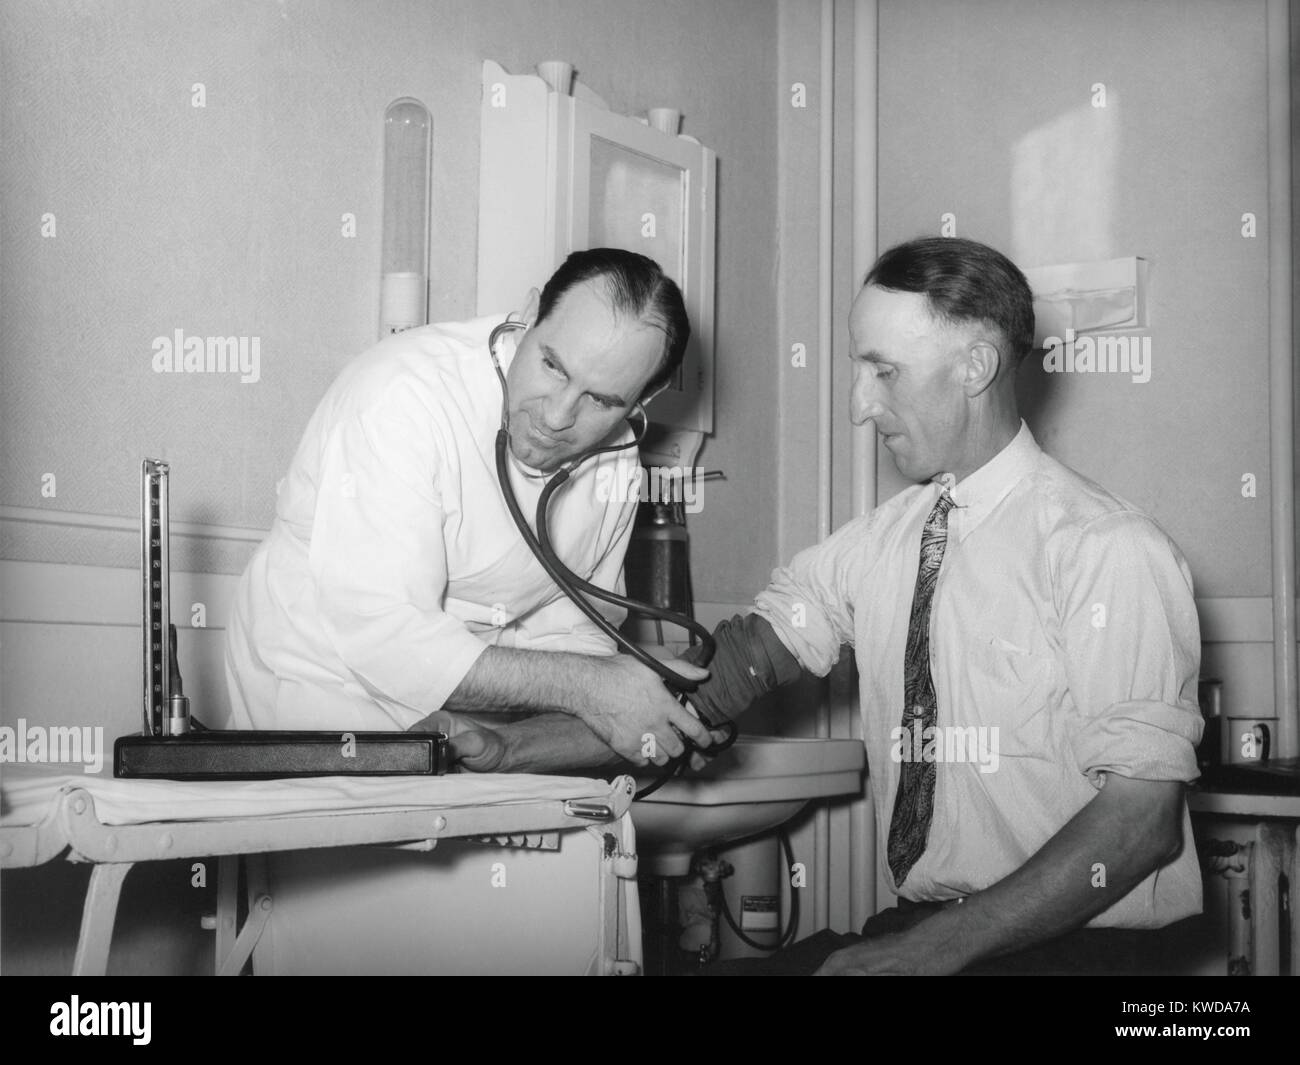 https://c8.alamy.com/comp/KWDA7A/doctor-at-a-medical-cooperative-taking-blood-pressure-of-a-patient-KWDA7A.jpg